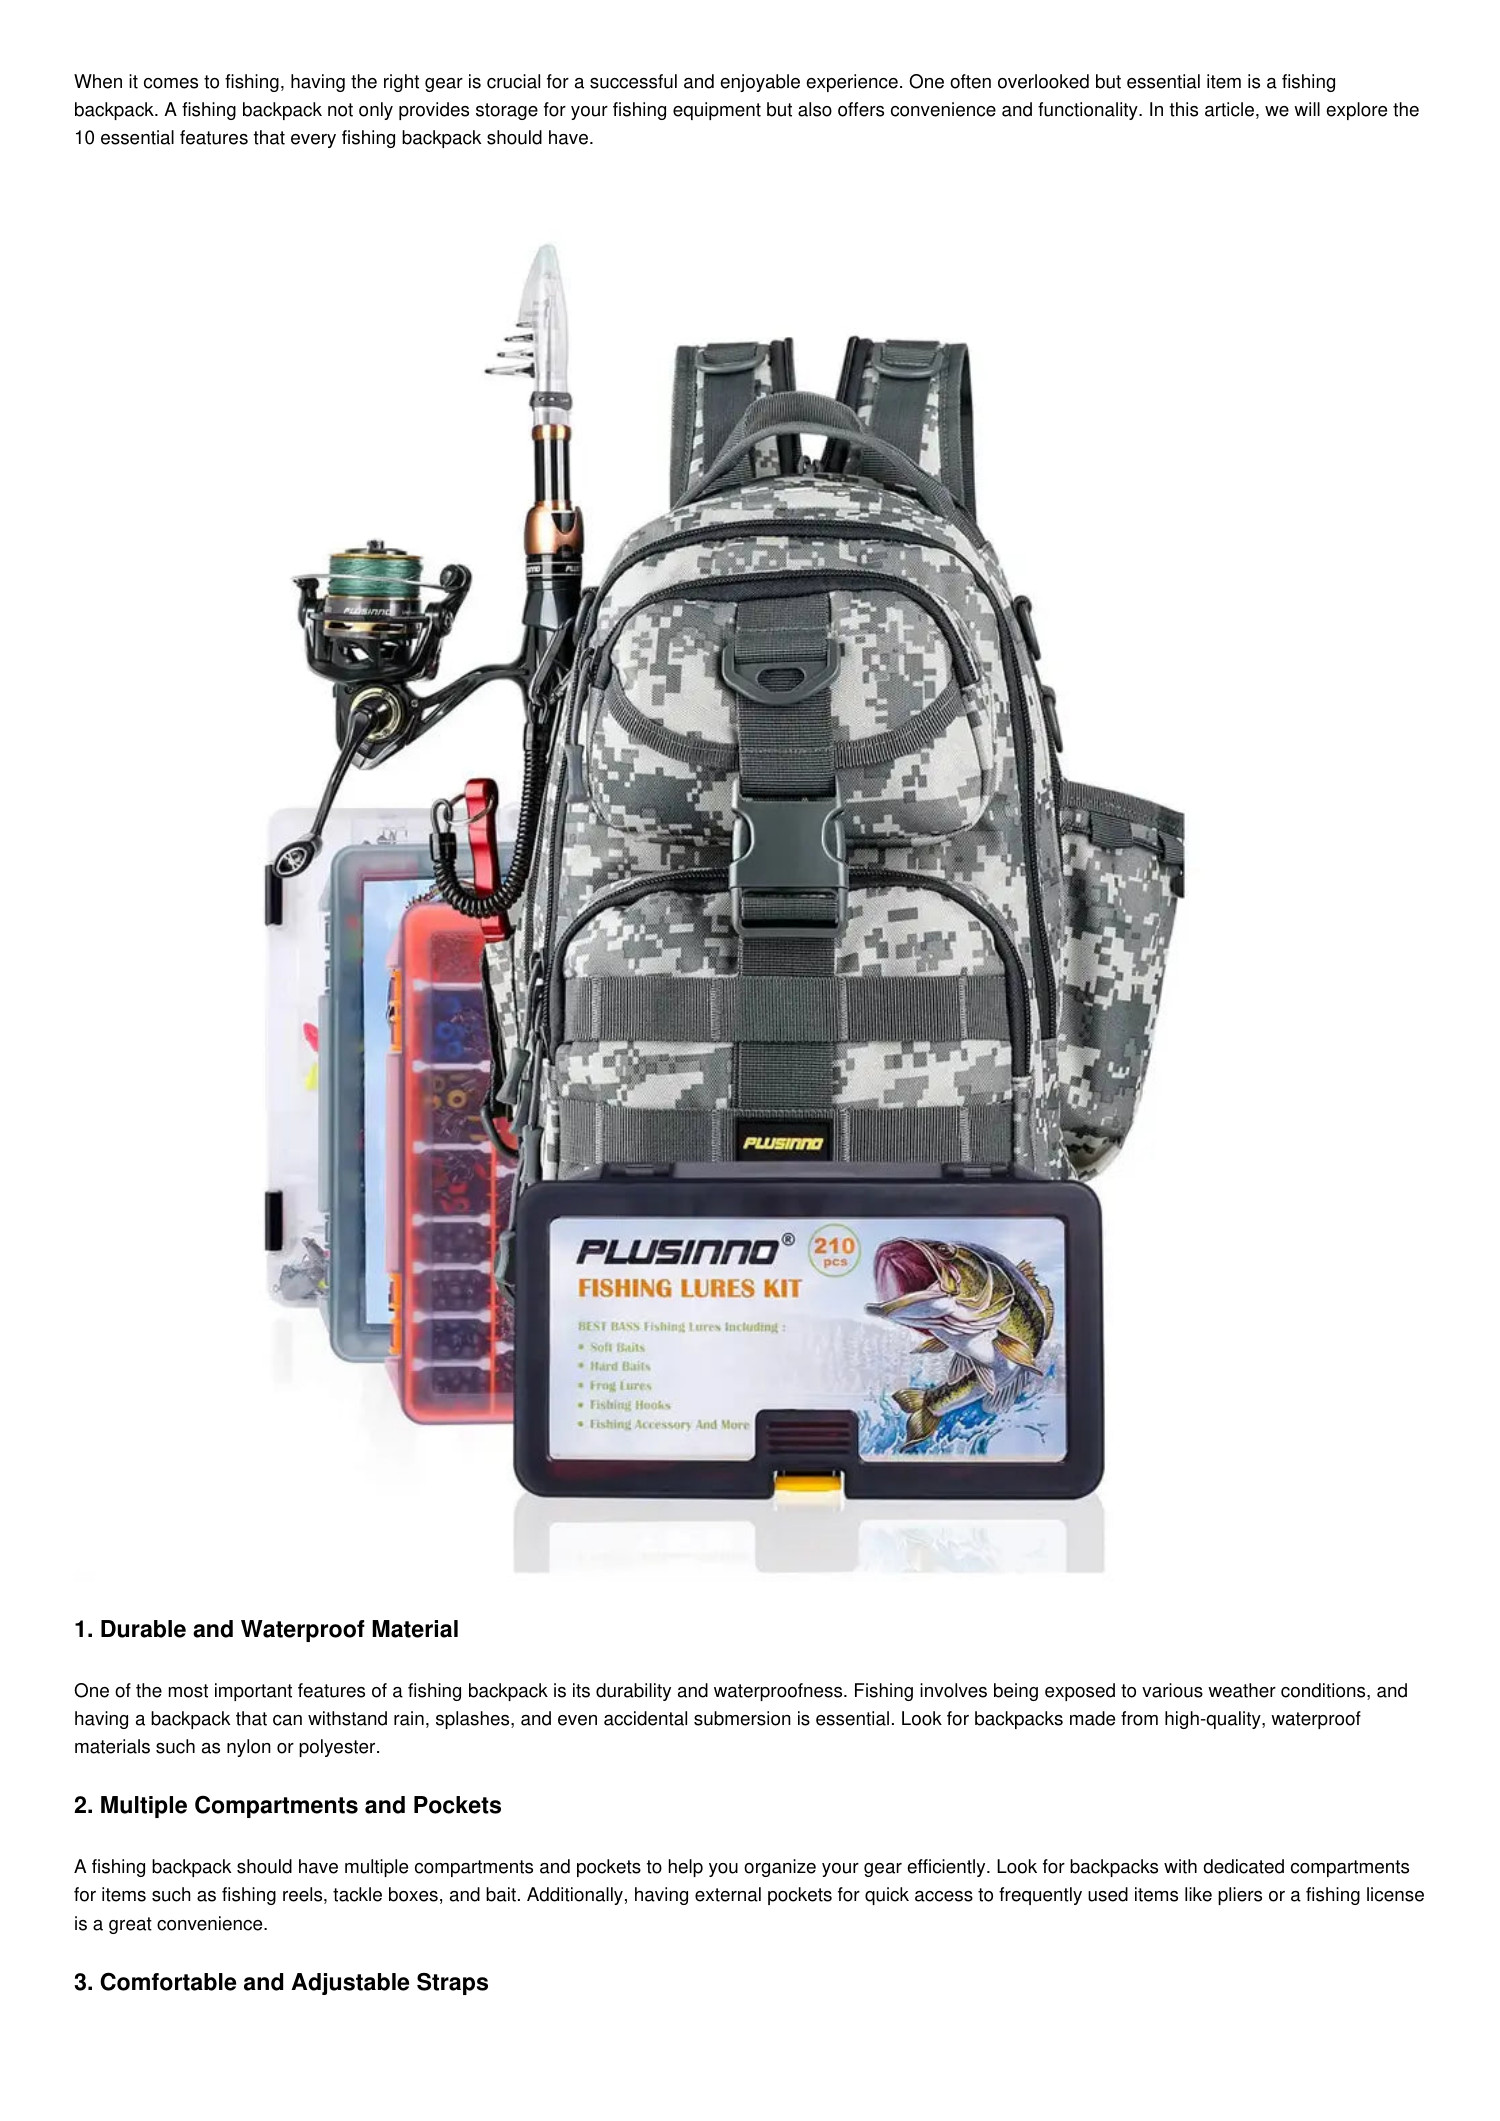 10 Essential Features Every Fishing Backpack Should Have.pdf